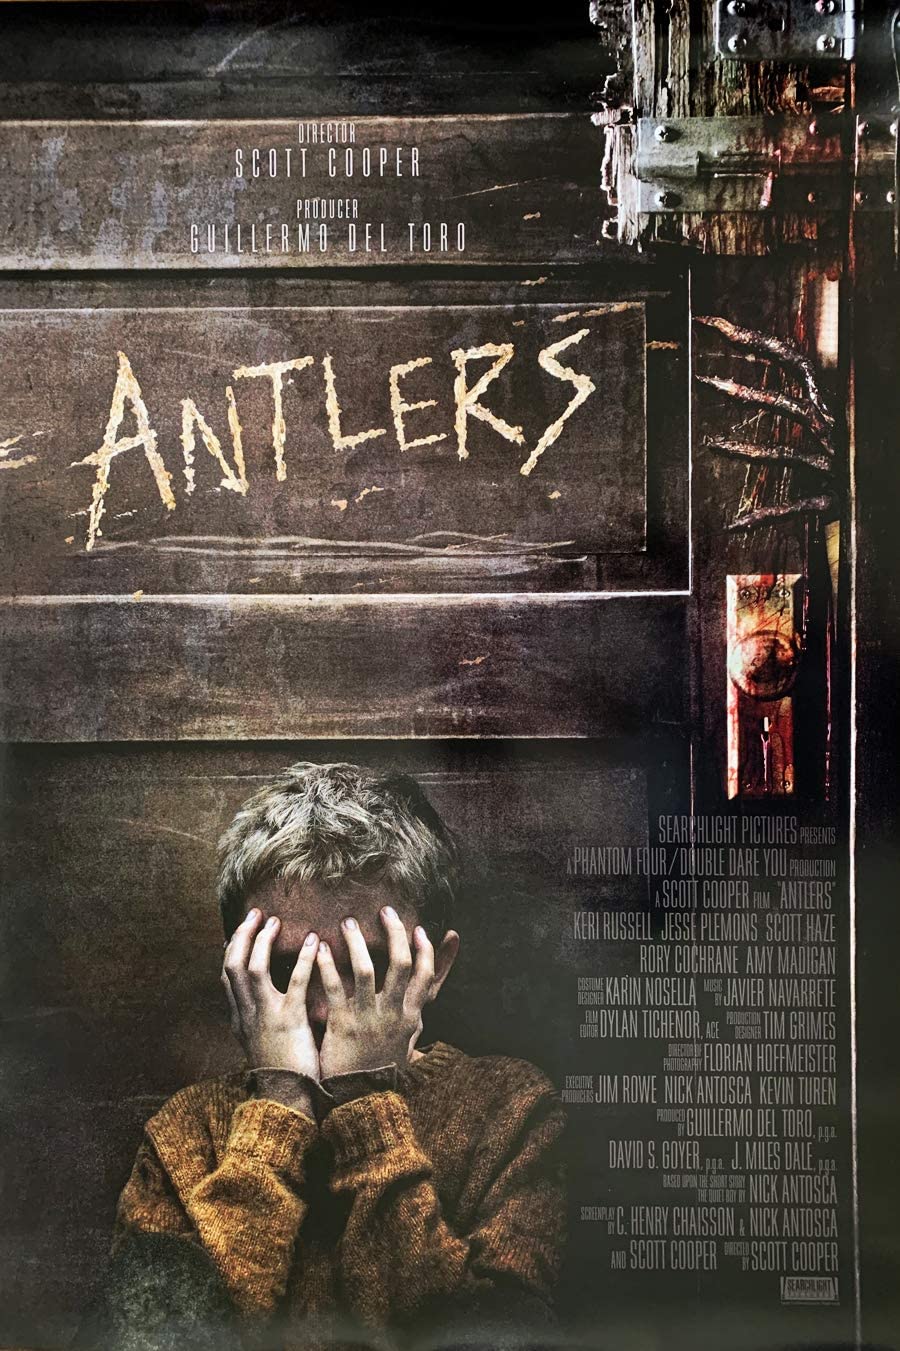 Antlers Movie Poster Wallpapers